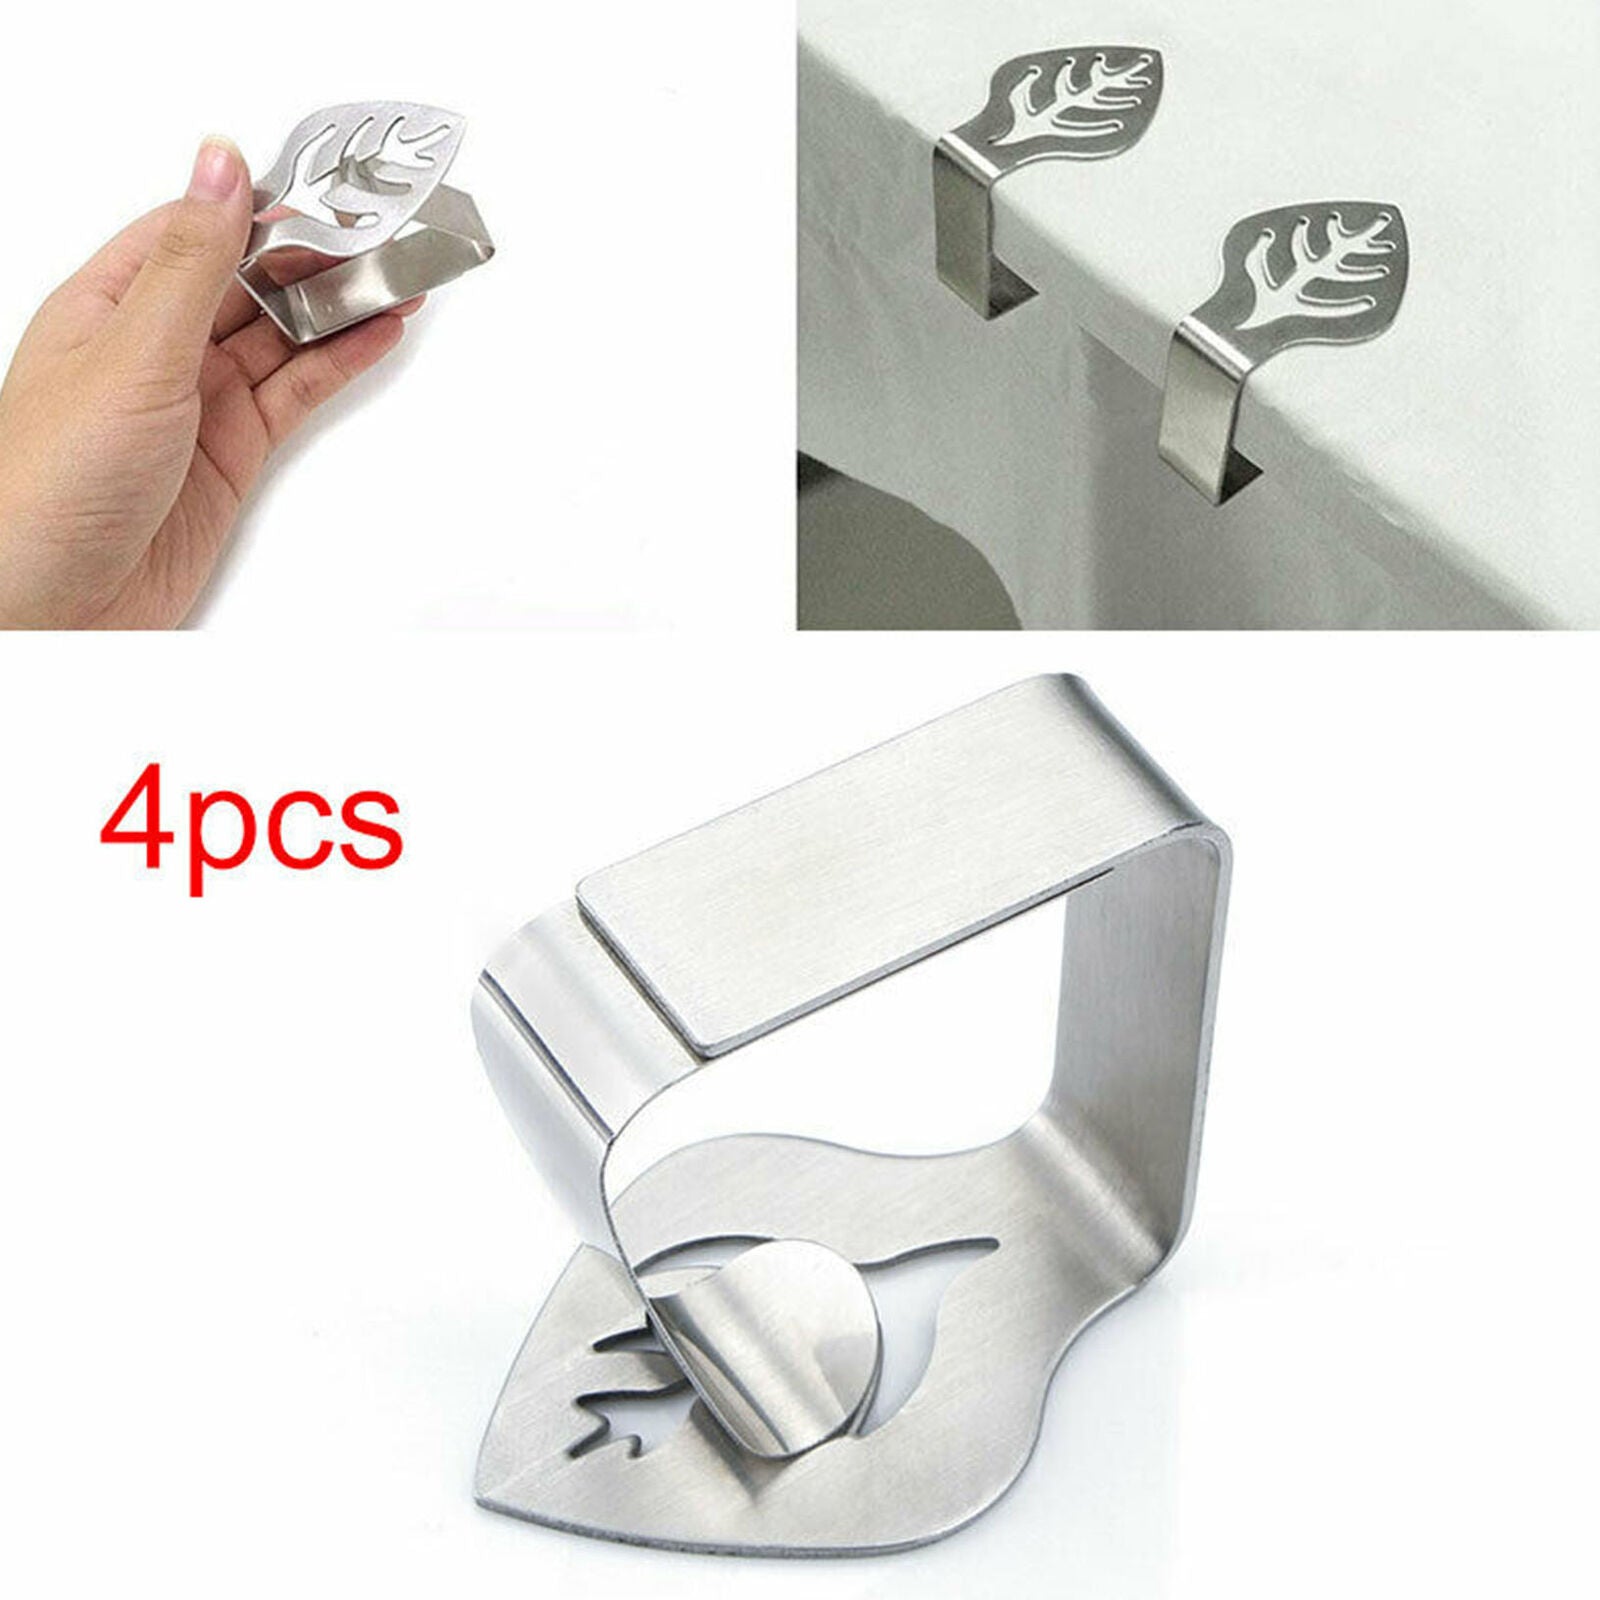 4x Leaf Shaped Table Cloth Clips Stainless Steel Table Cover Pegs Clamp Holder